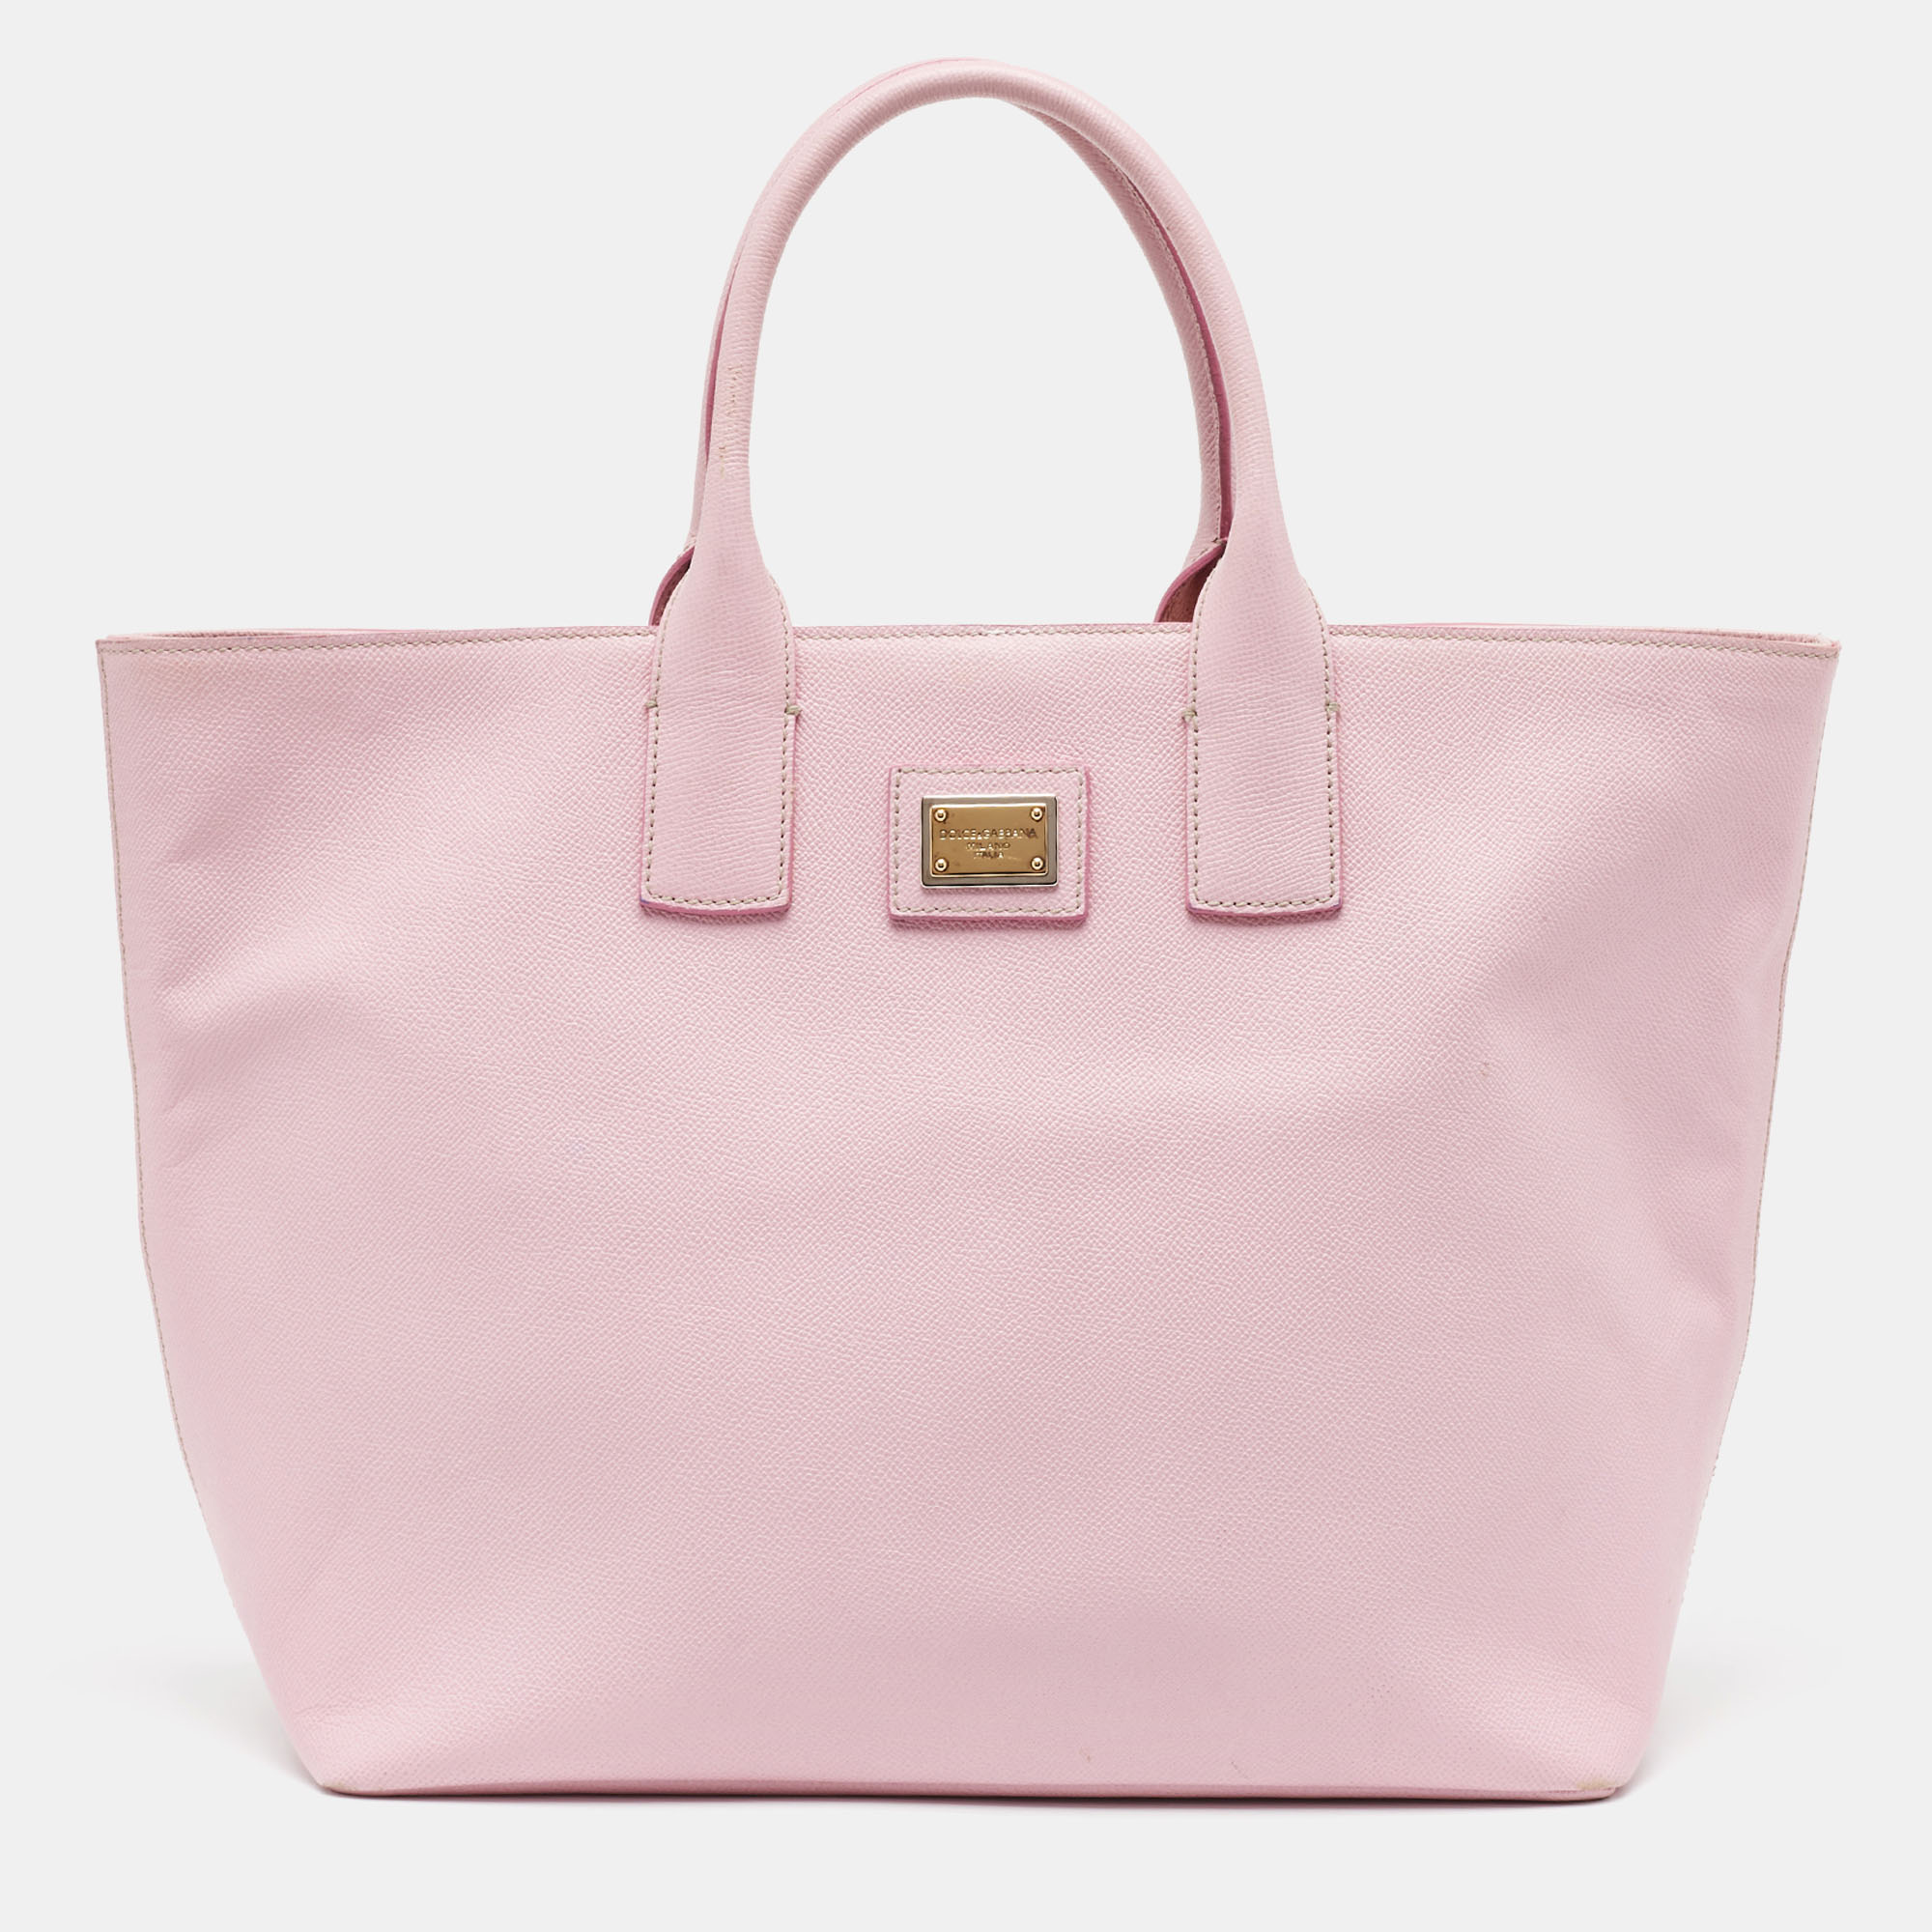 Dolce & gabbana pink leather miss escape tote